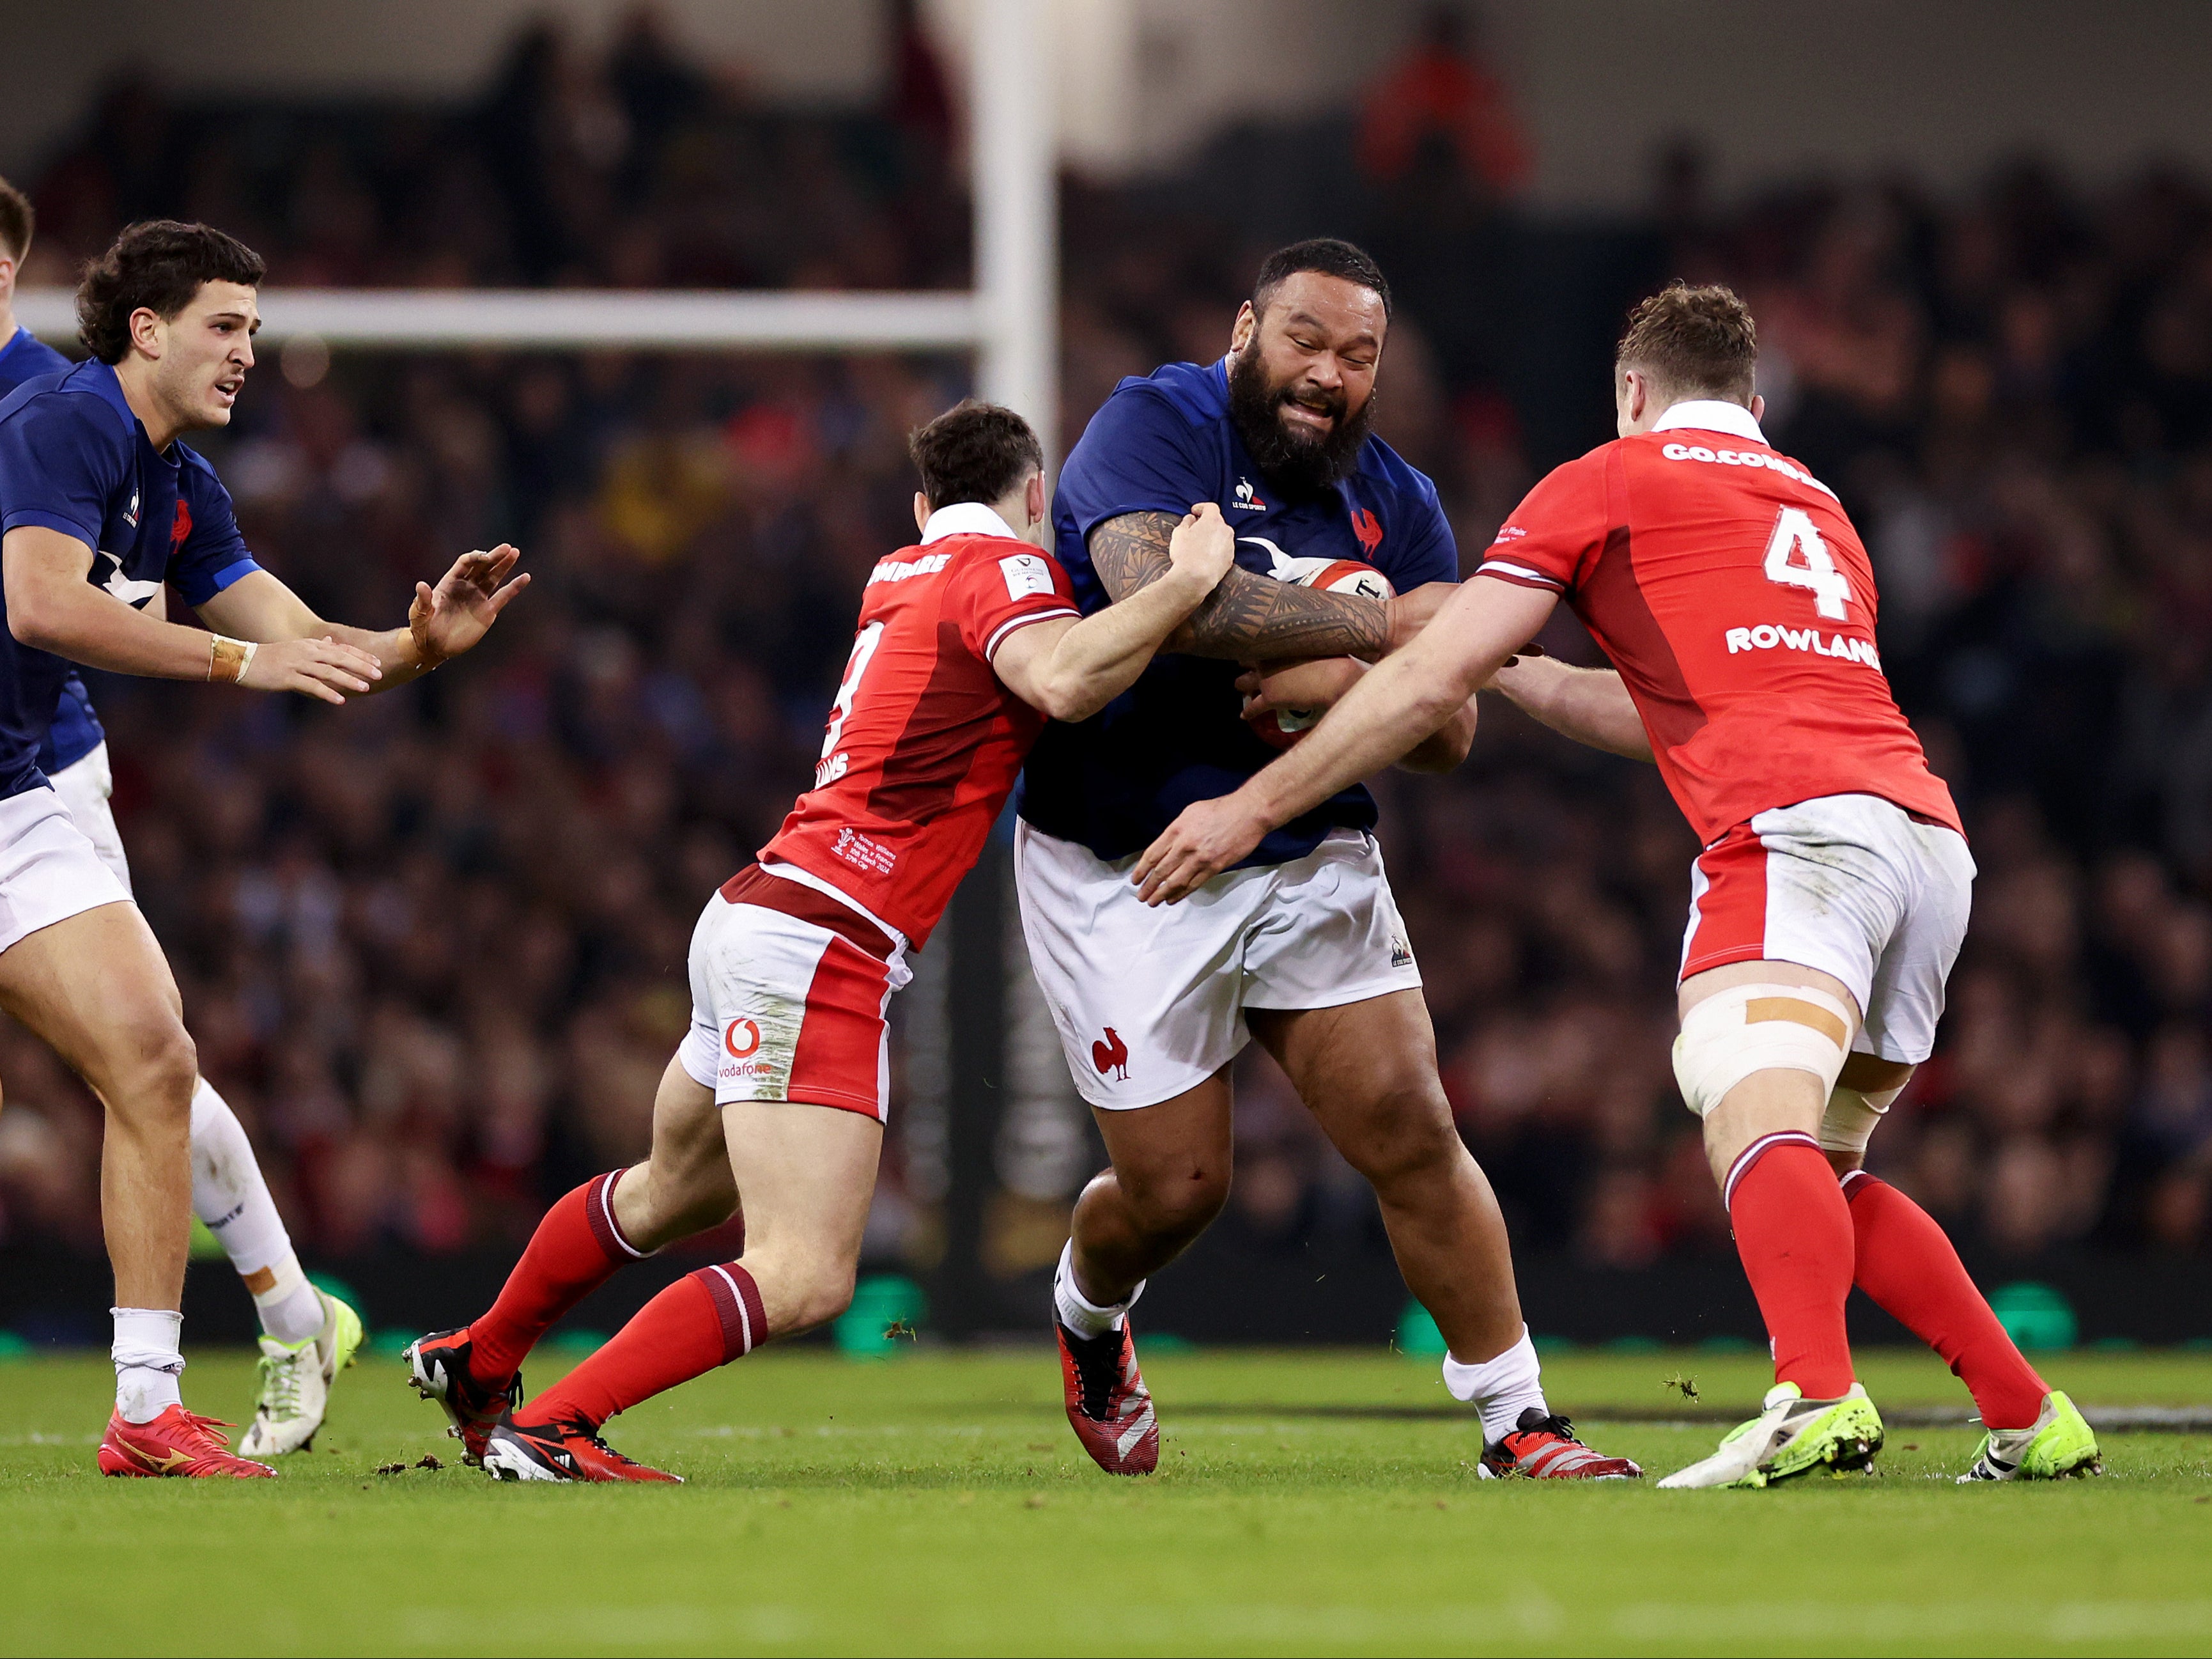 France’s power game was to the fore against Wales